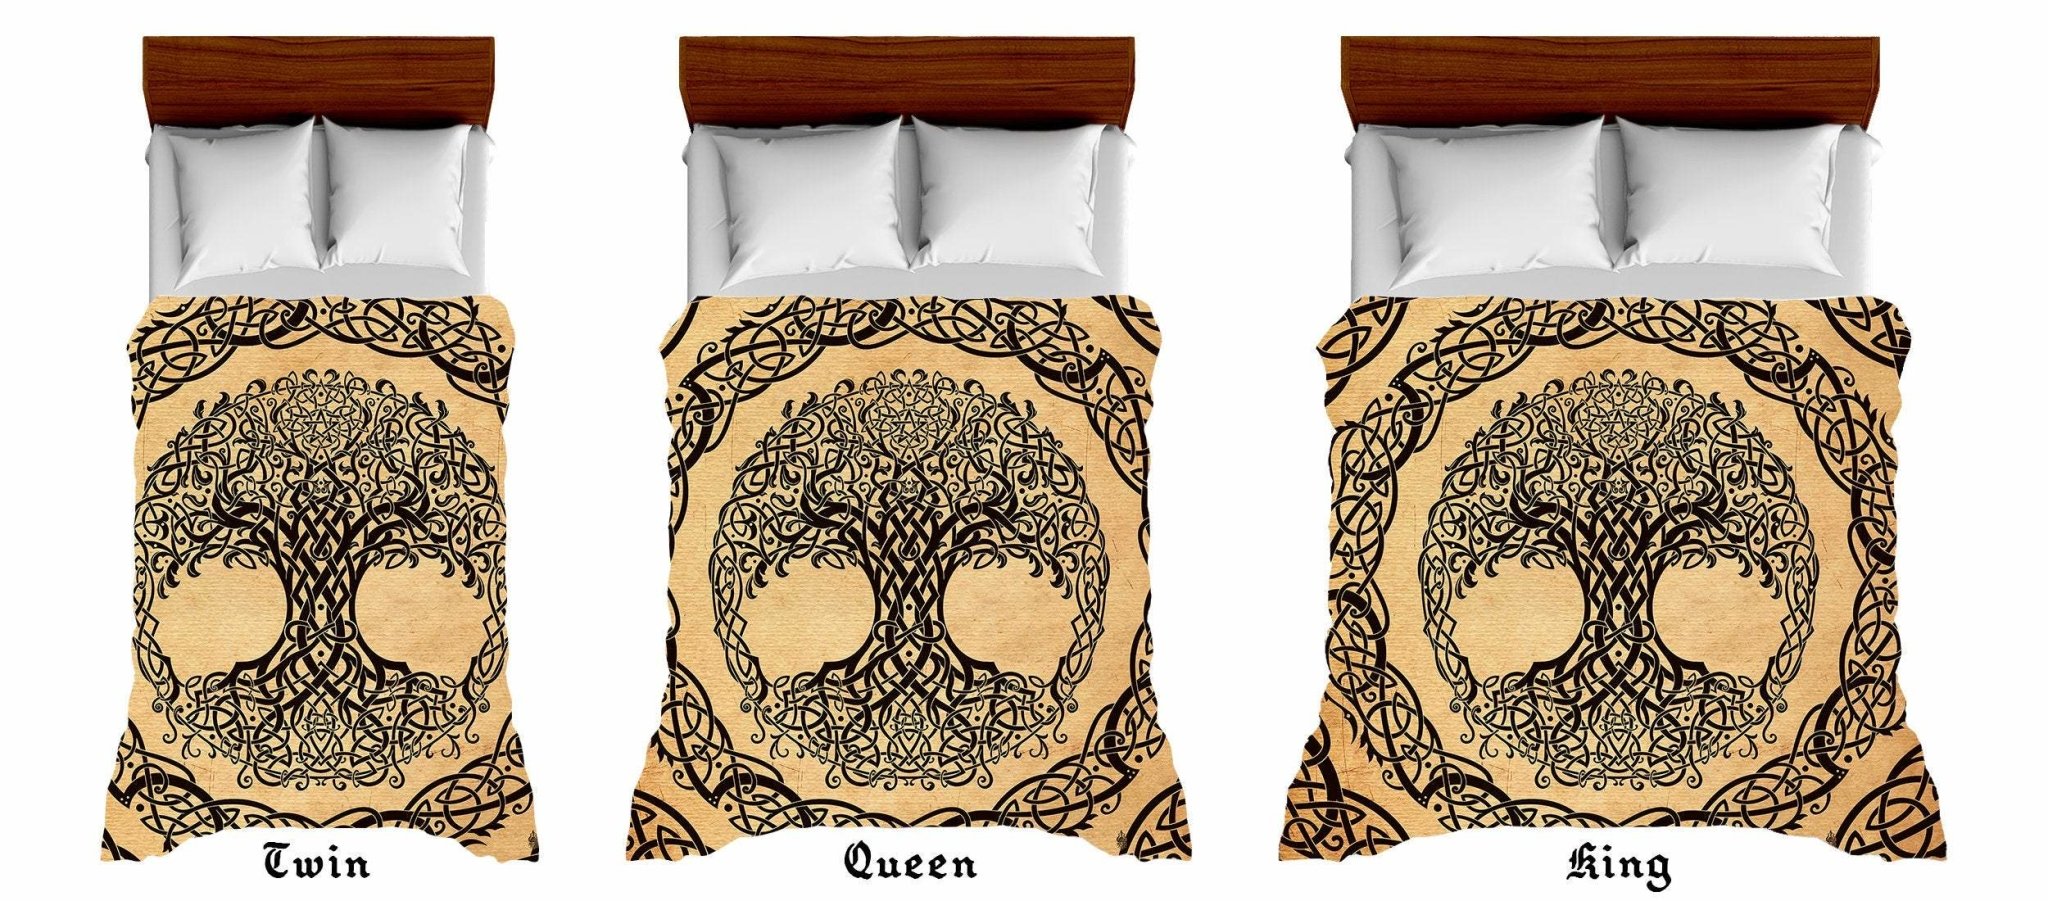 Tree of Life Bedding Set, Comforter and Duvet, Indie Bed Cover, Witchy Bedroom Decor King, Queen and Twin Size - Celtic, Paper - Abysm Internal